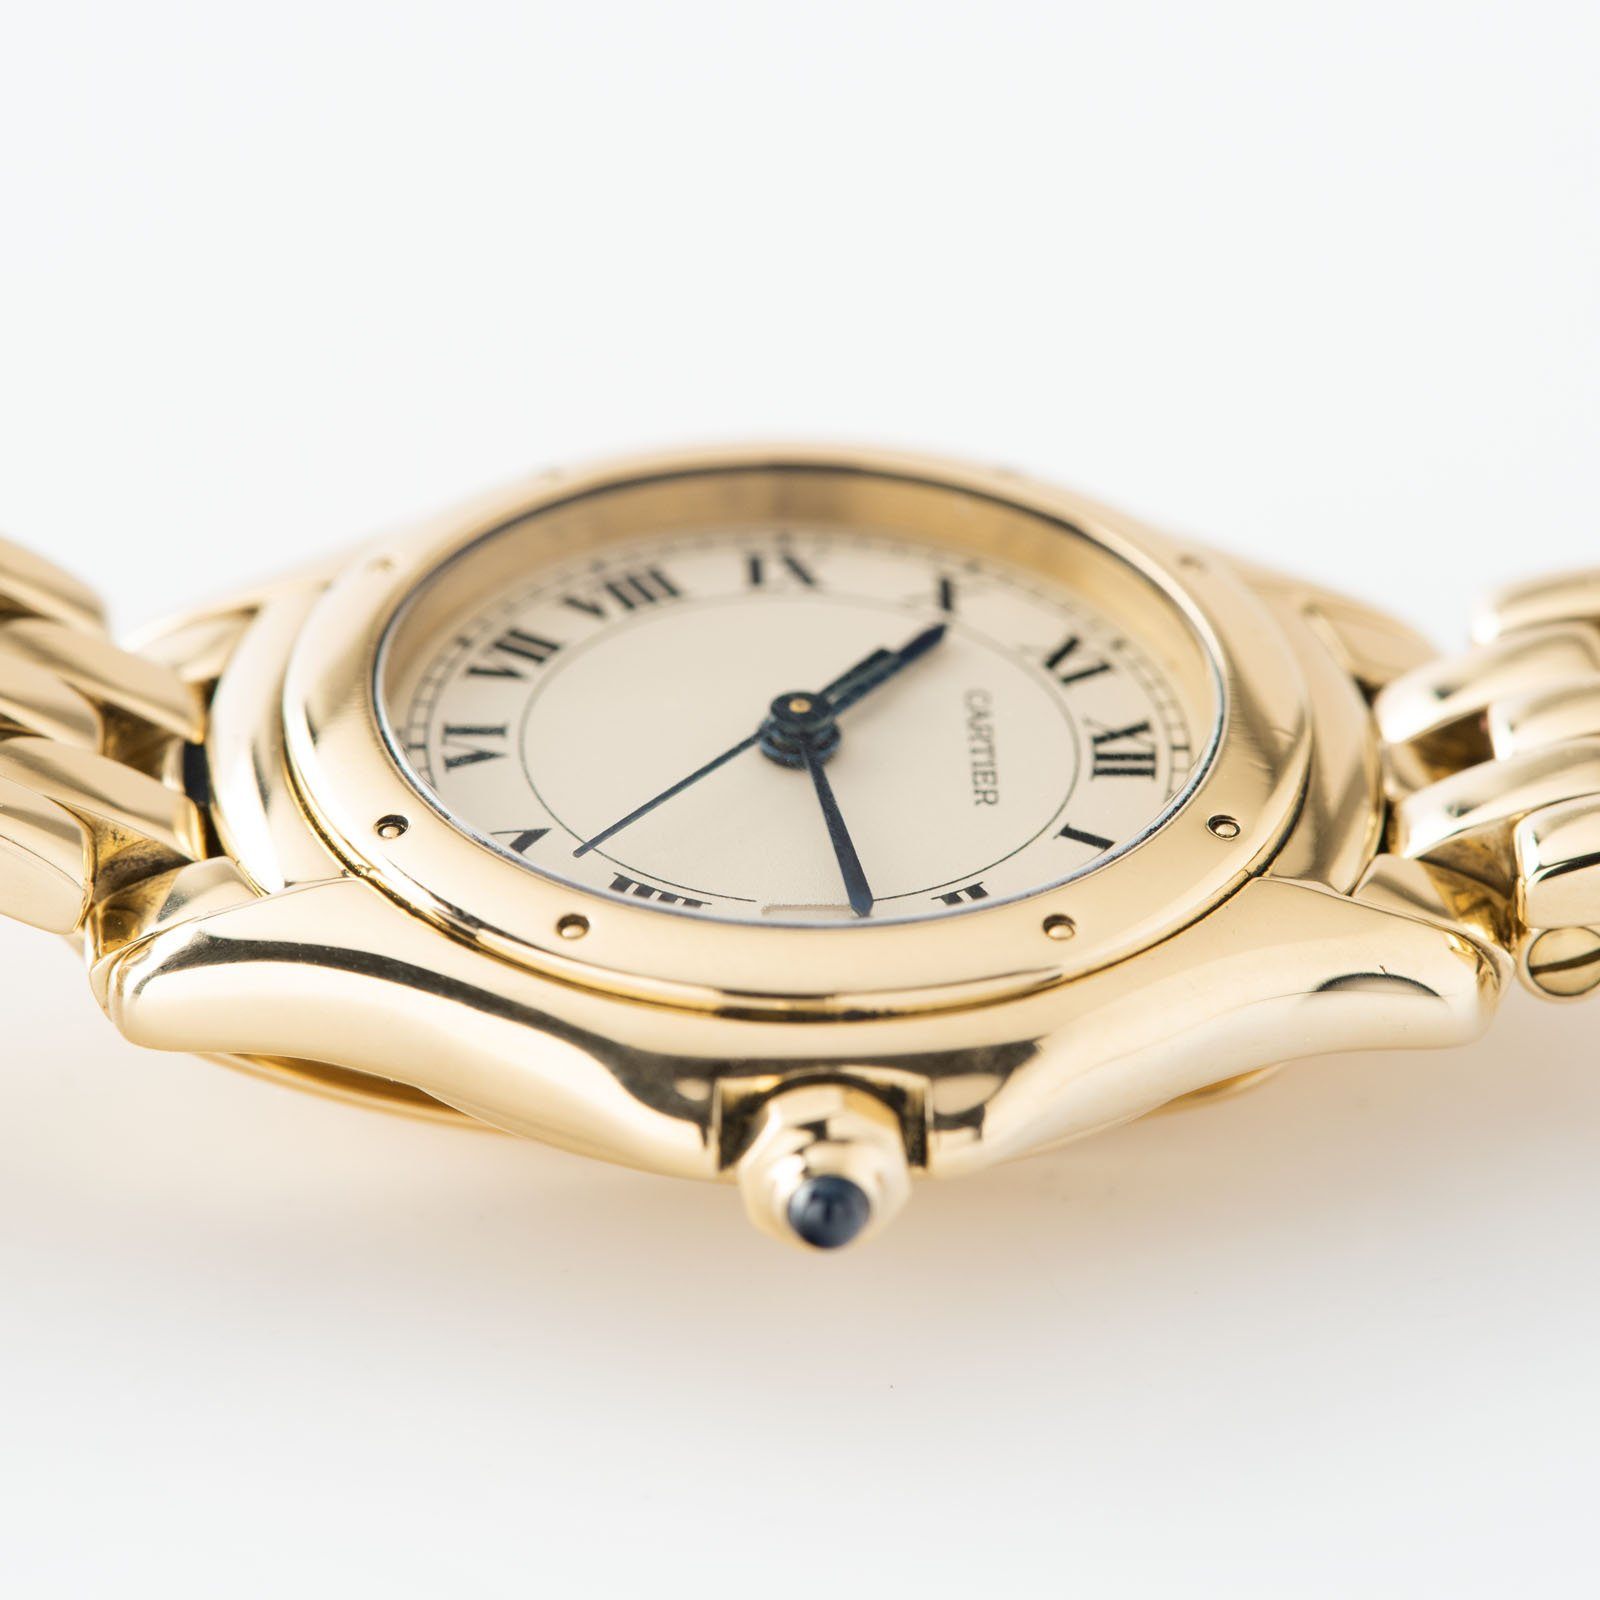 Cartier Cougar 18kt Yellow Gold Ladies Watch 